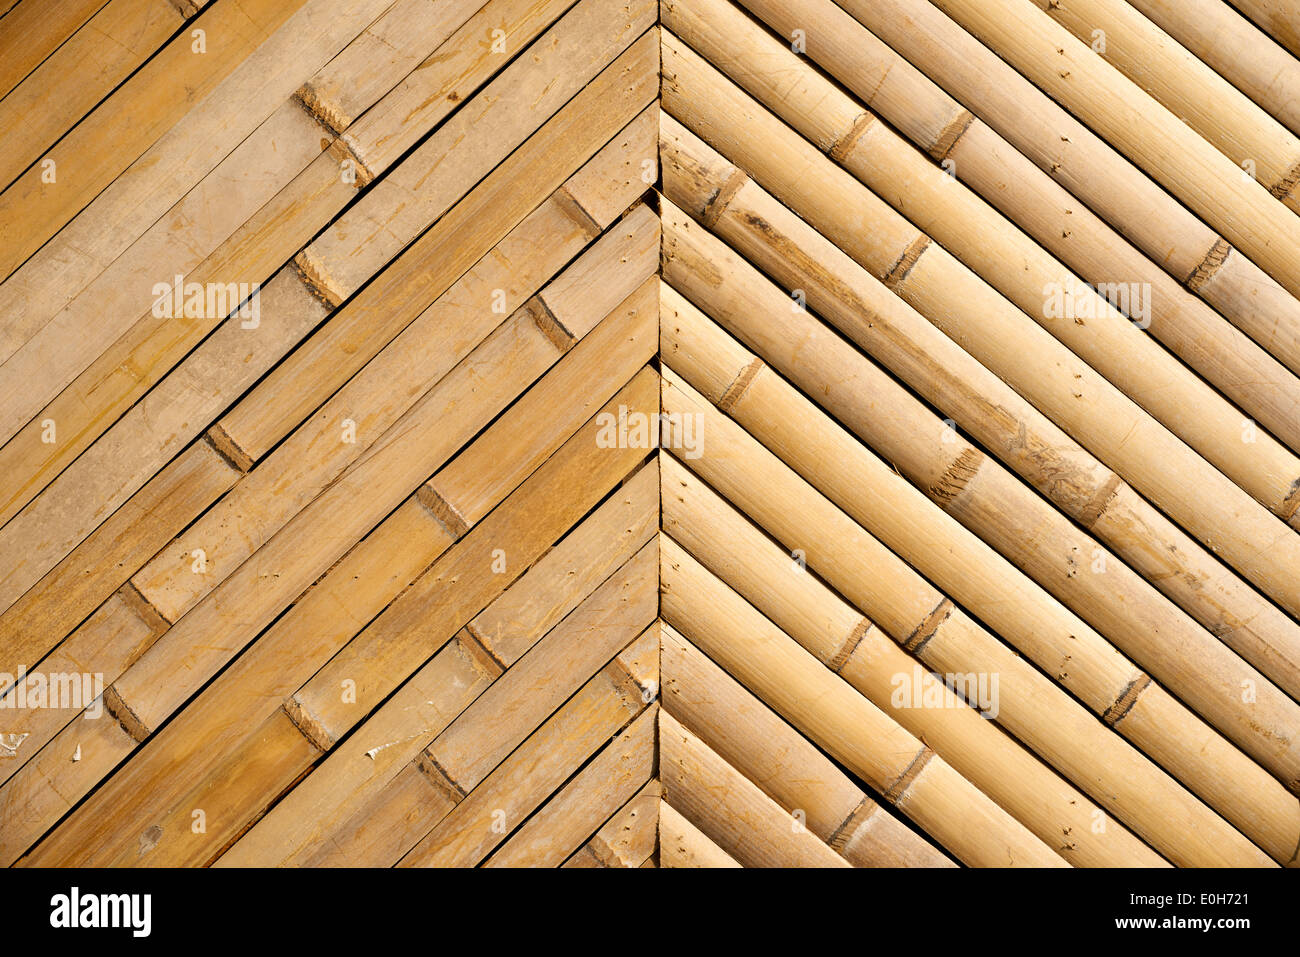 Background texture of bamboo poles as wall or bamboo fence Stock Photo